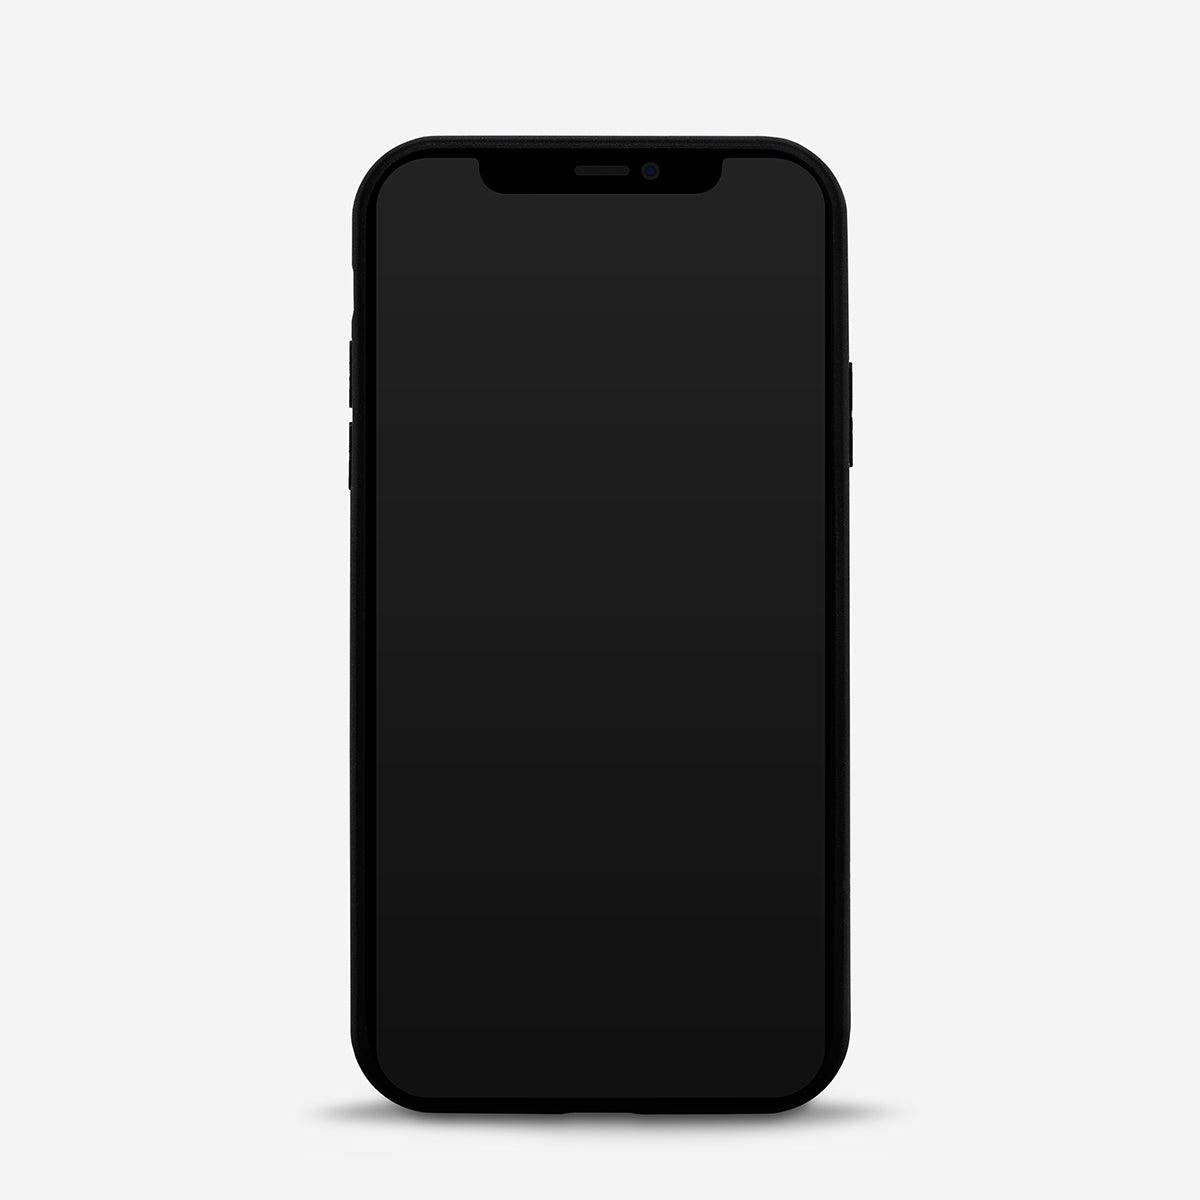 Status Anxiety Who's Who Leather iPhone Cases Black